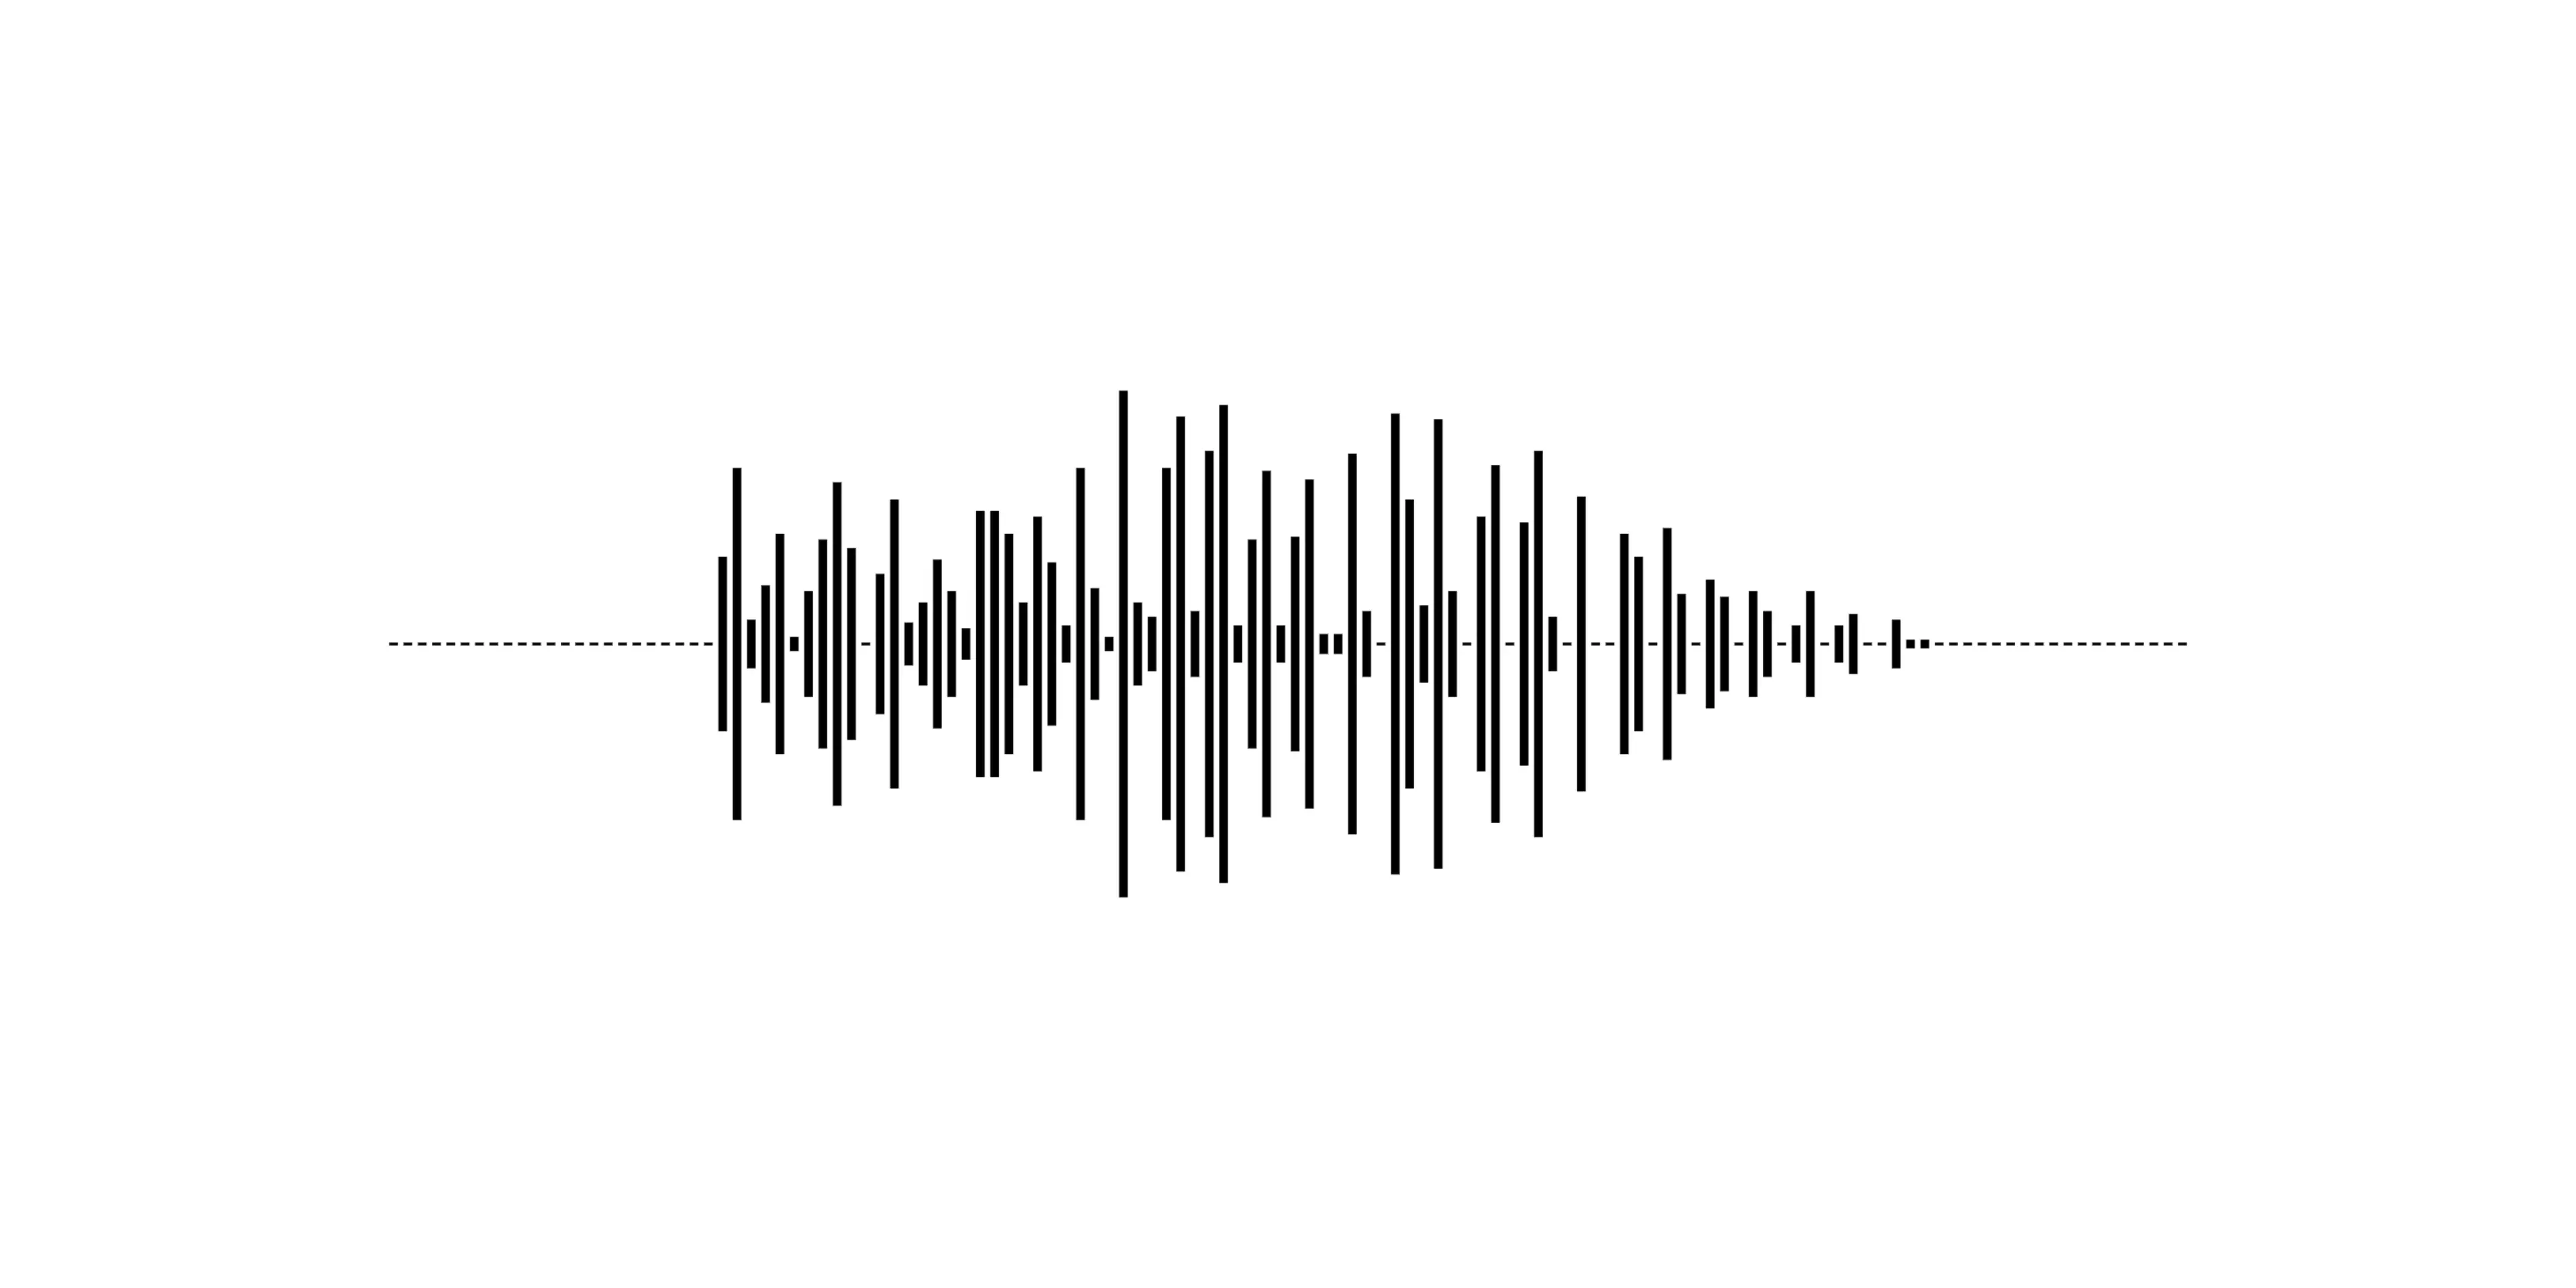 Generating Sound Waves from Spotify Songs